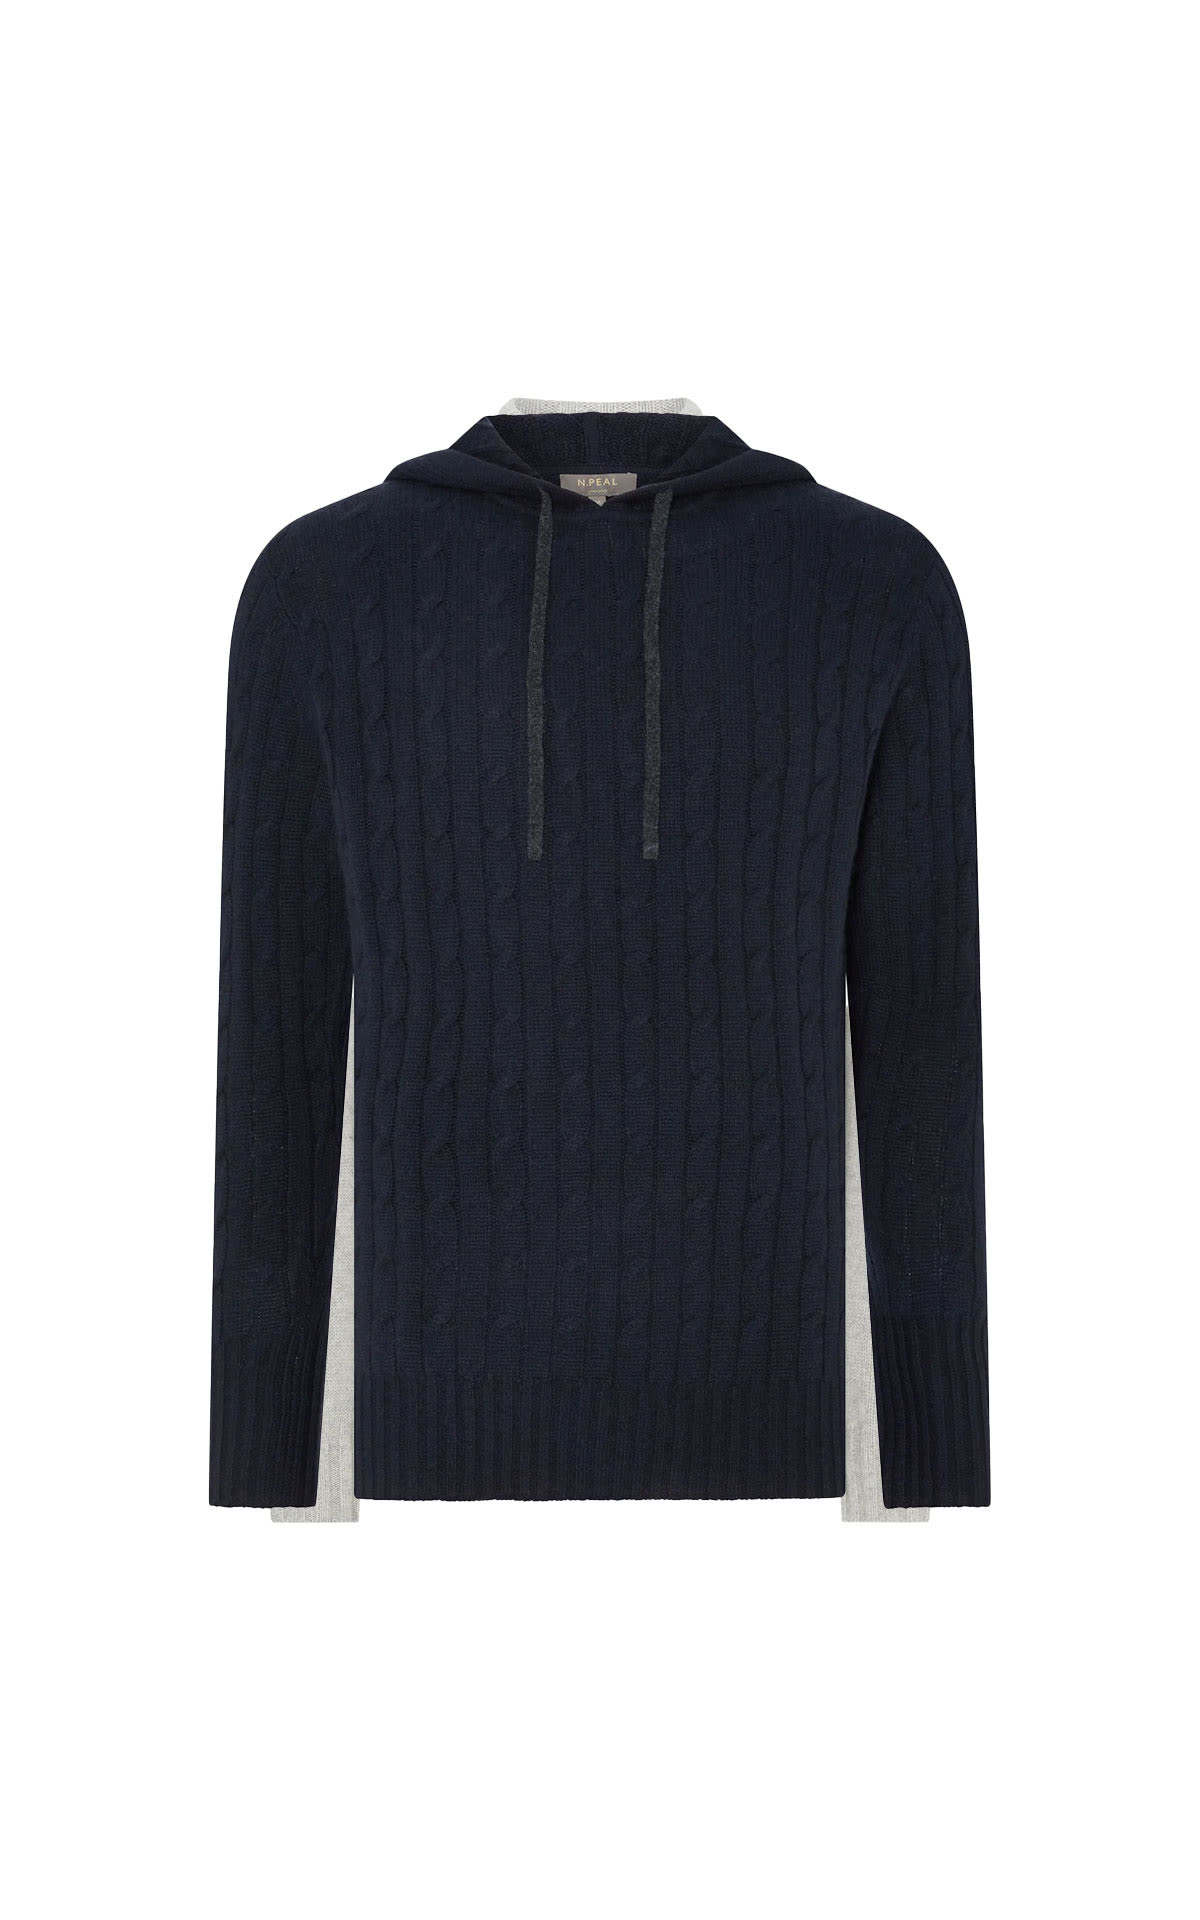 N. Peal Cable cashmere hoodie navy blue  from Bicester Village